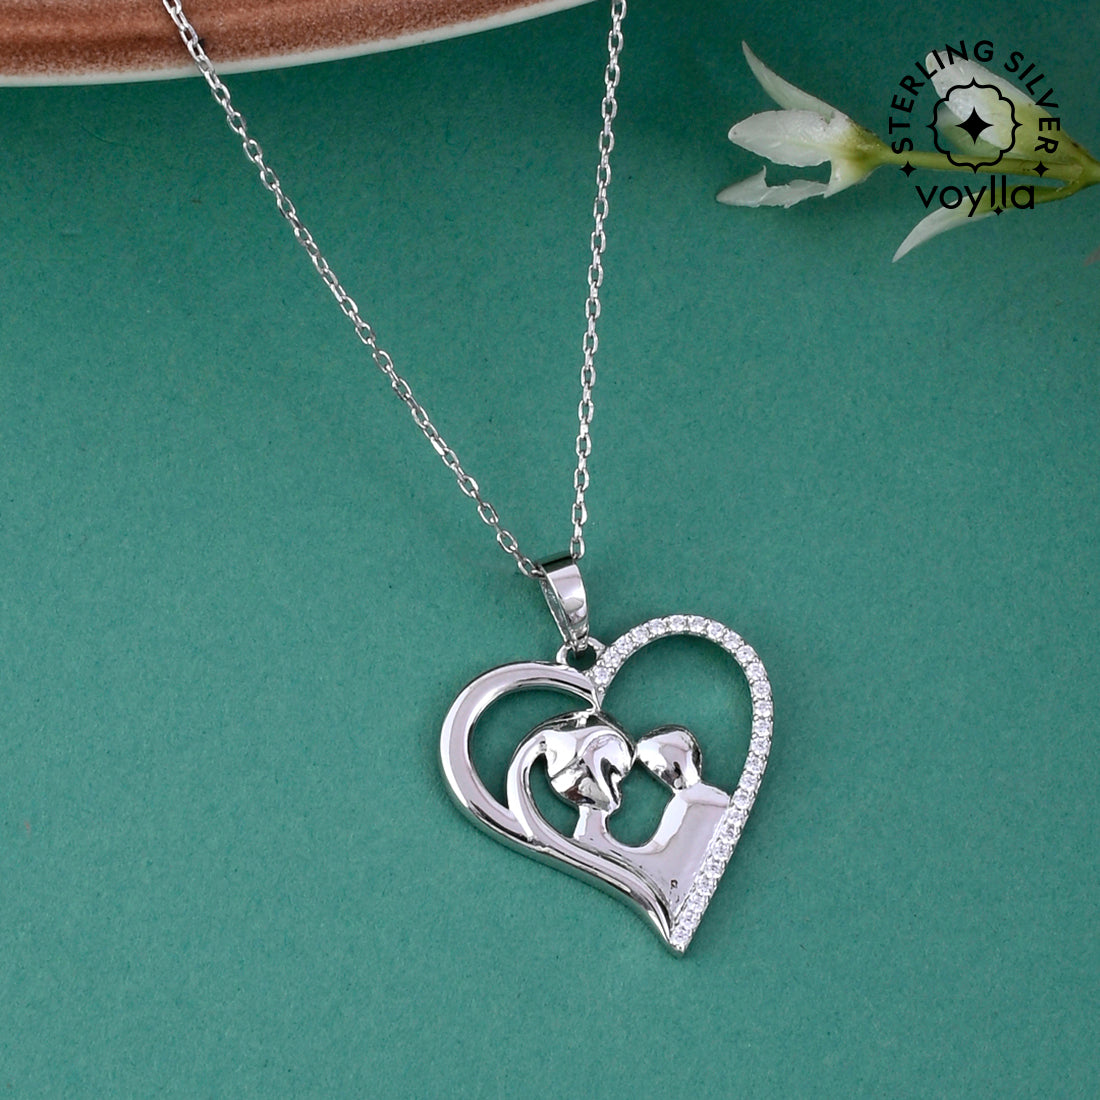 925 Sterling Silver Entwined Heart Pendant